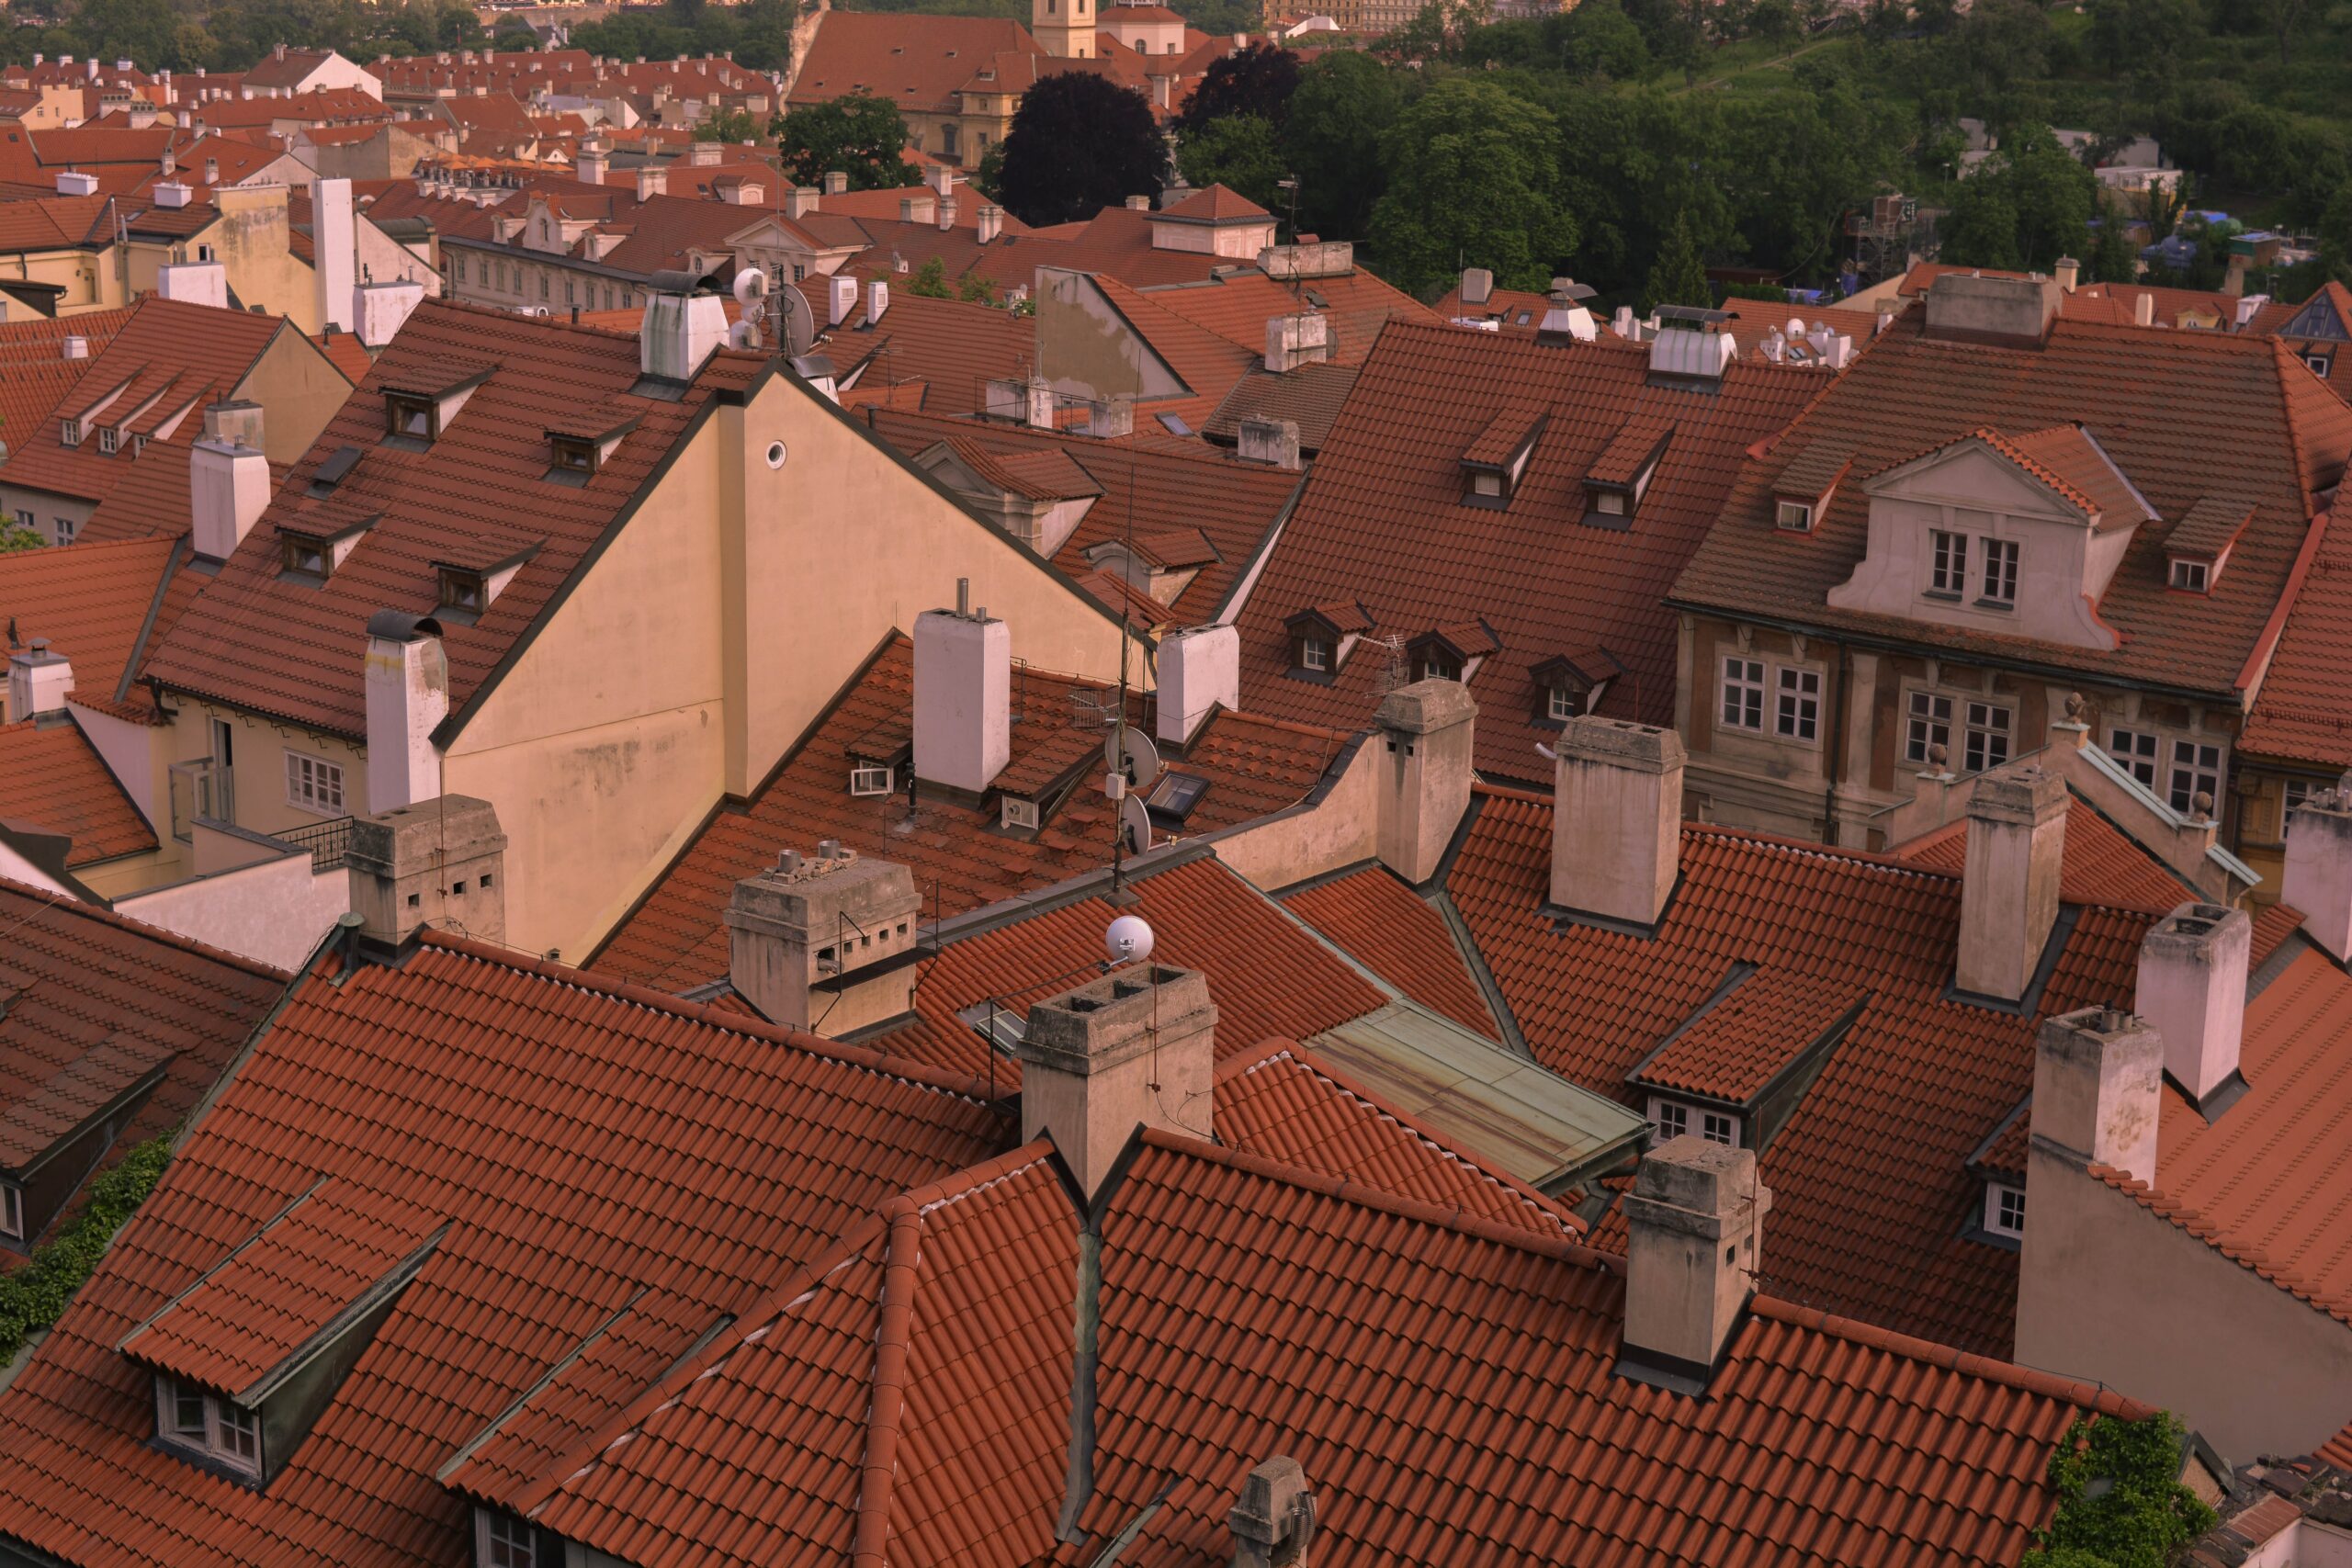  Tiled Roofs